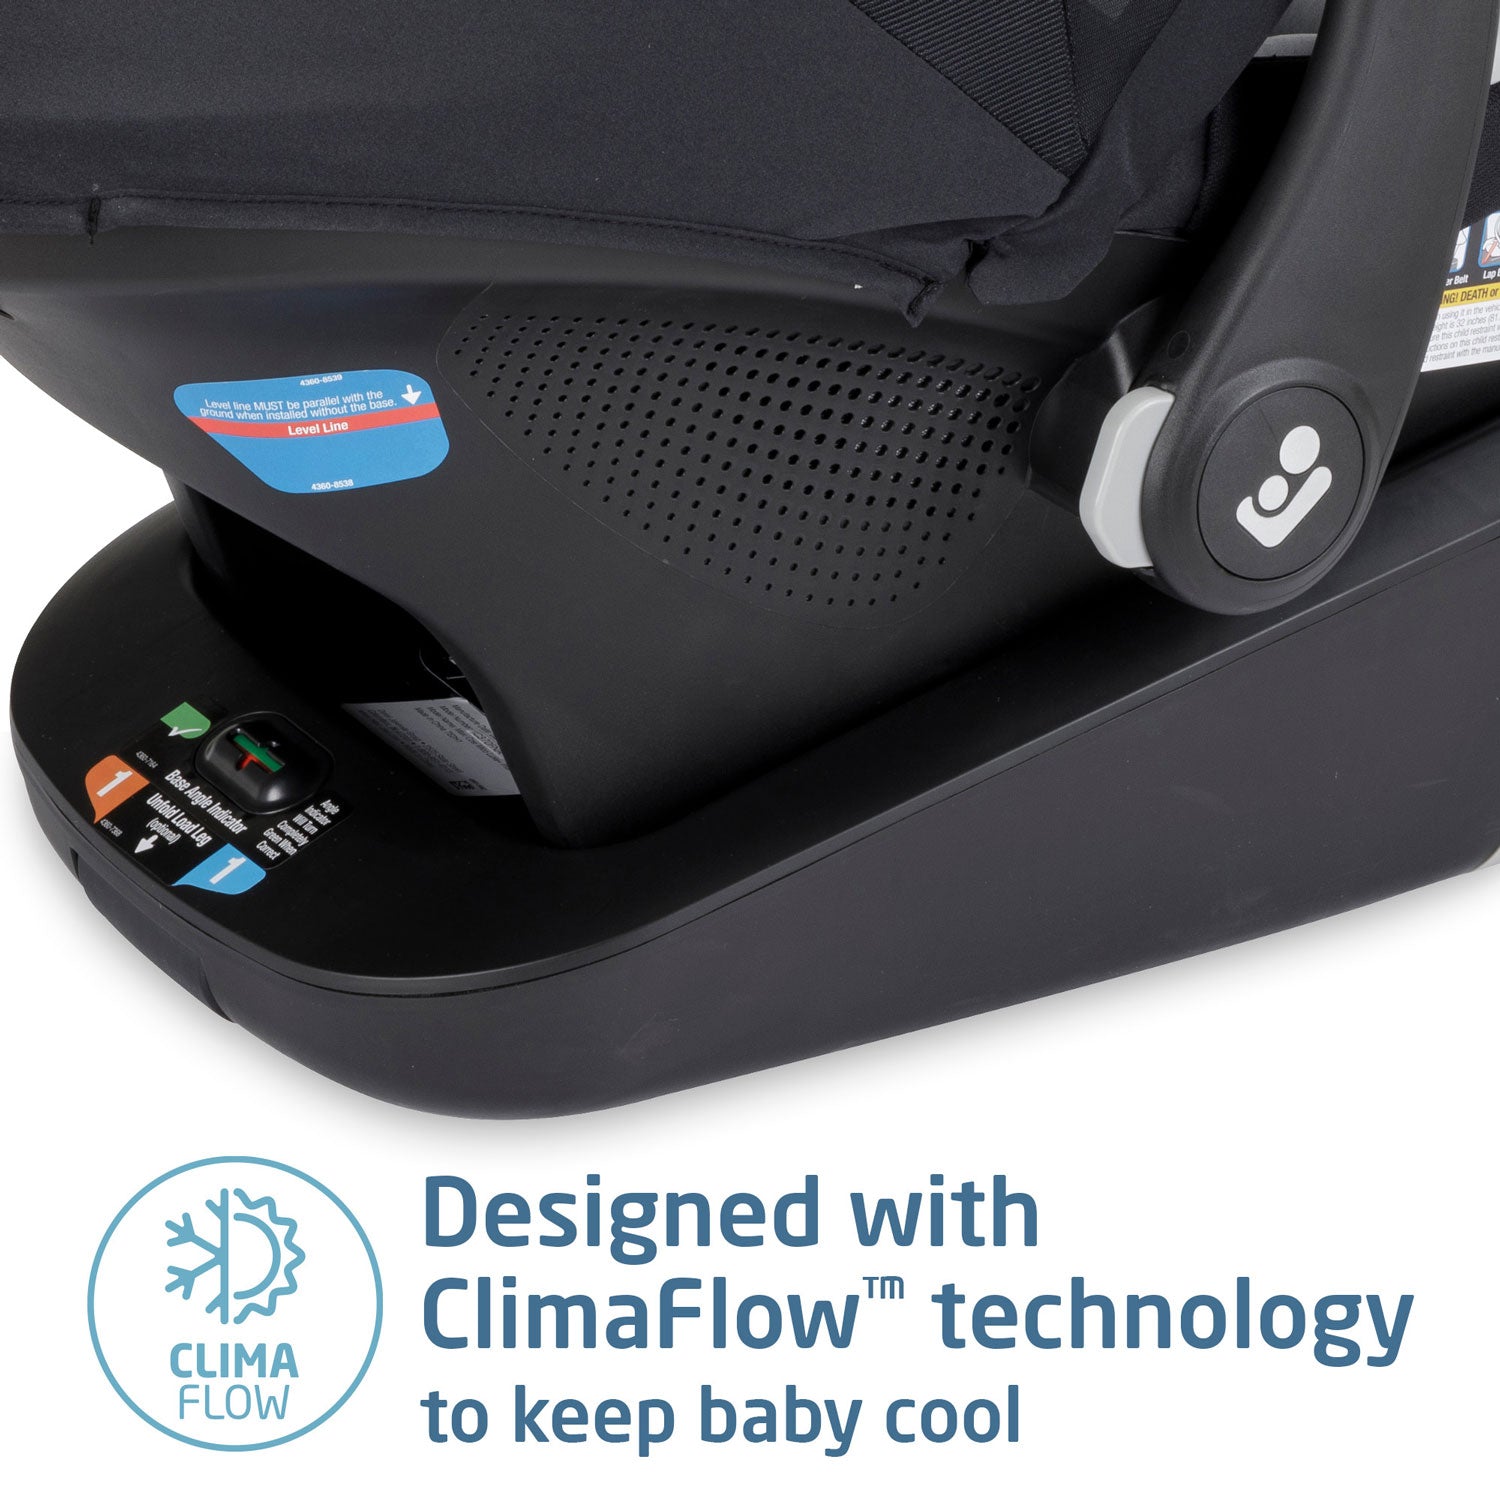 Maxi-Cosi Mico Luxe+ Infant Car Seat ClimaFlow technology